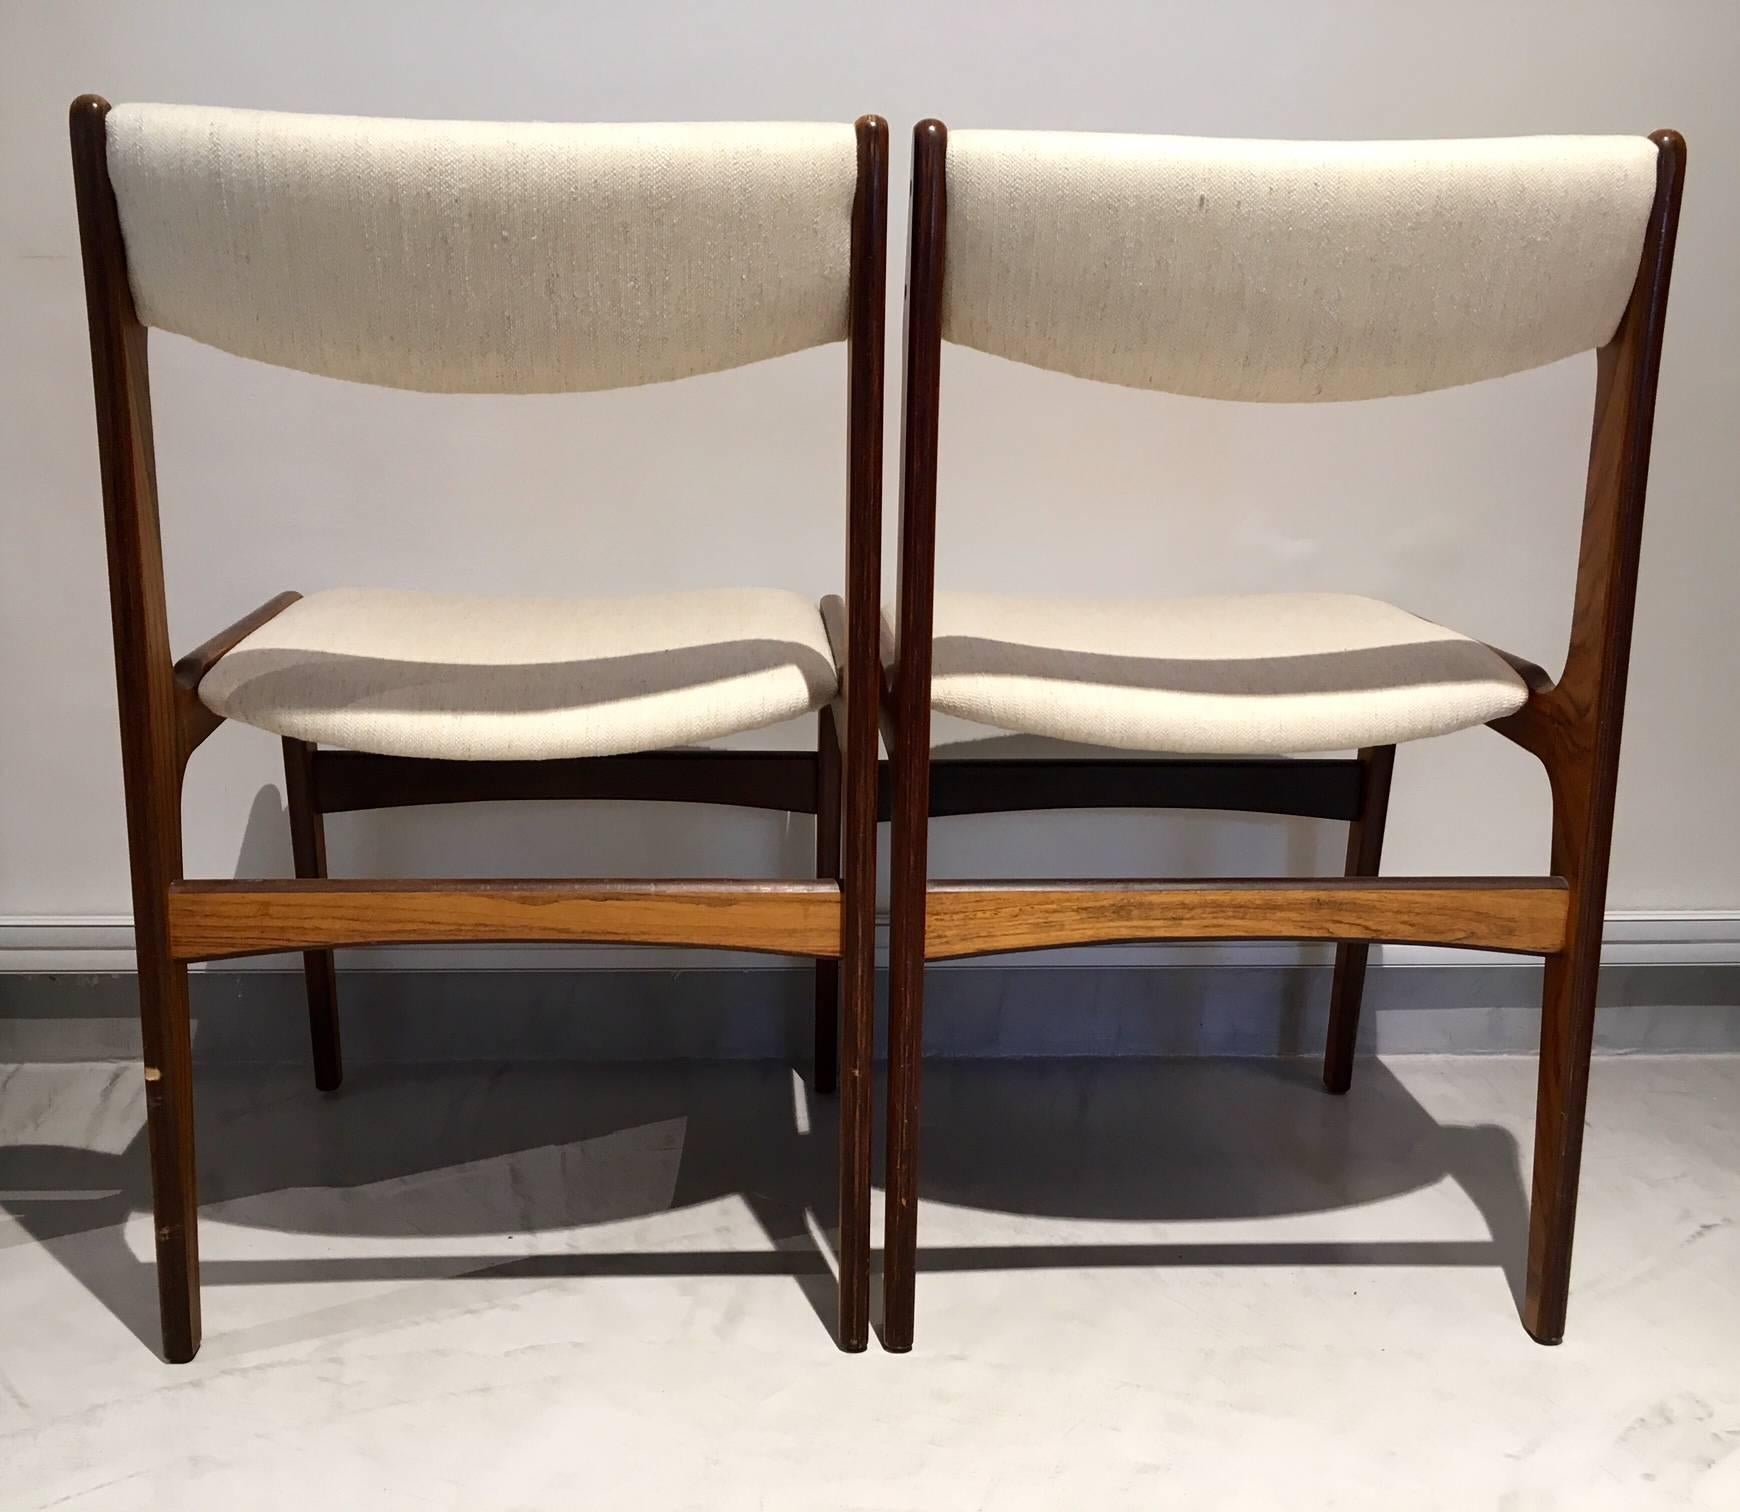 Fabric Set of Six Midcentury Danish Wooden Dining Chairs with White Covers